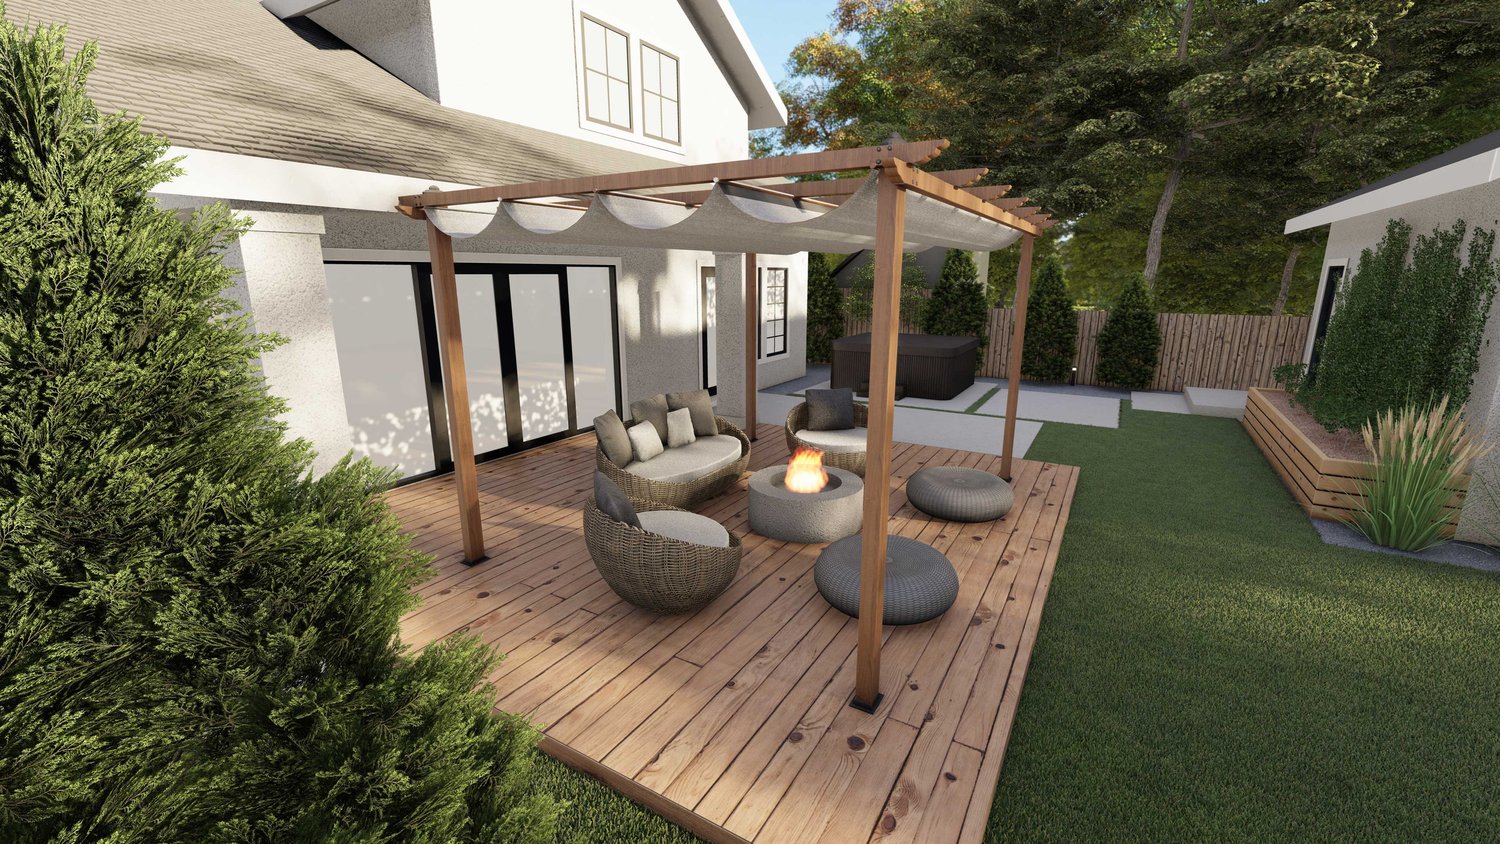 Twin Falls front yard showing patio and pergola with canopy over fire pit seating area